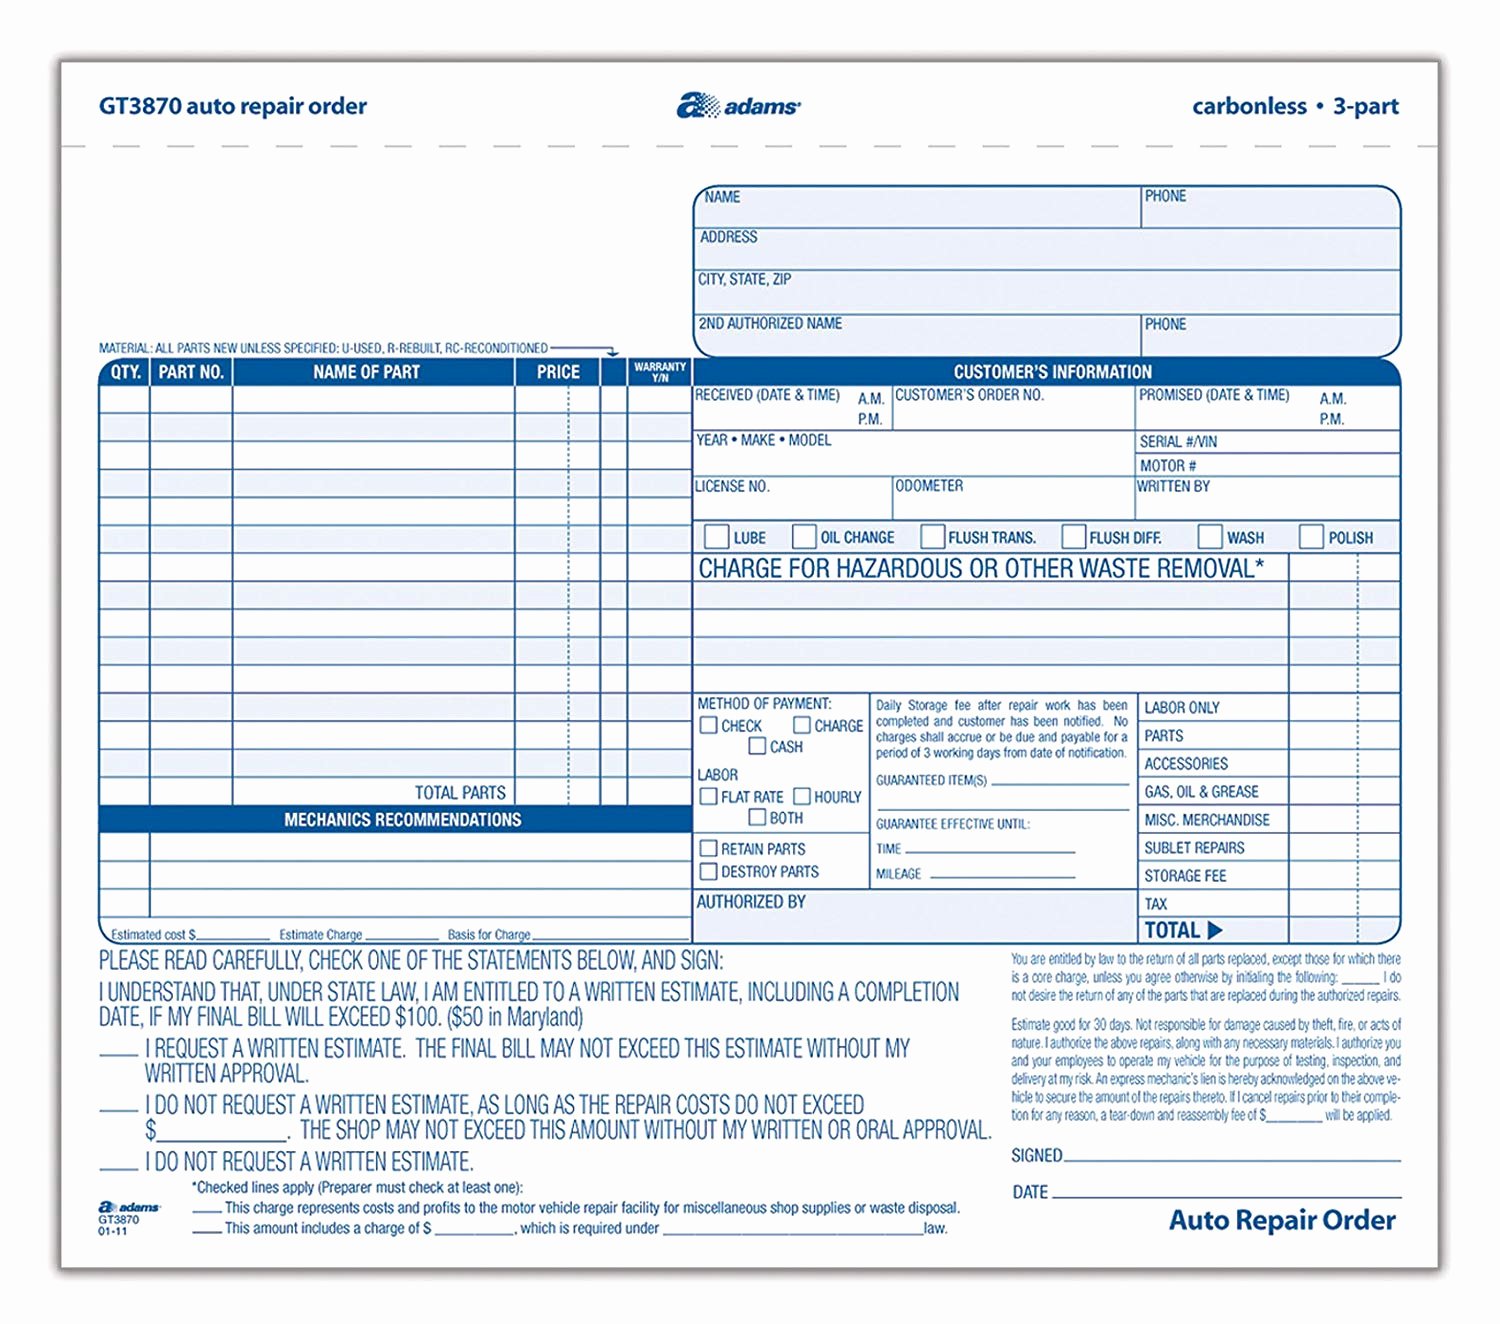 Auto Repair order Template Free Inspirational Adams Auto Repair order forms 8 5 X 7 44 Inch 3 Part